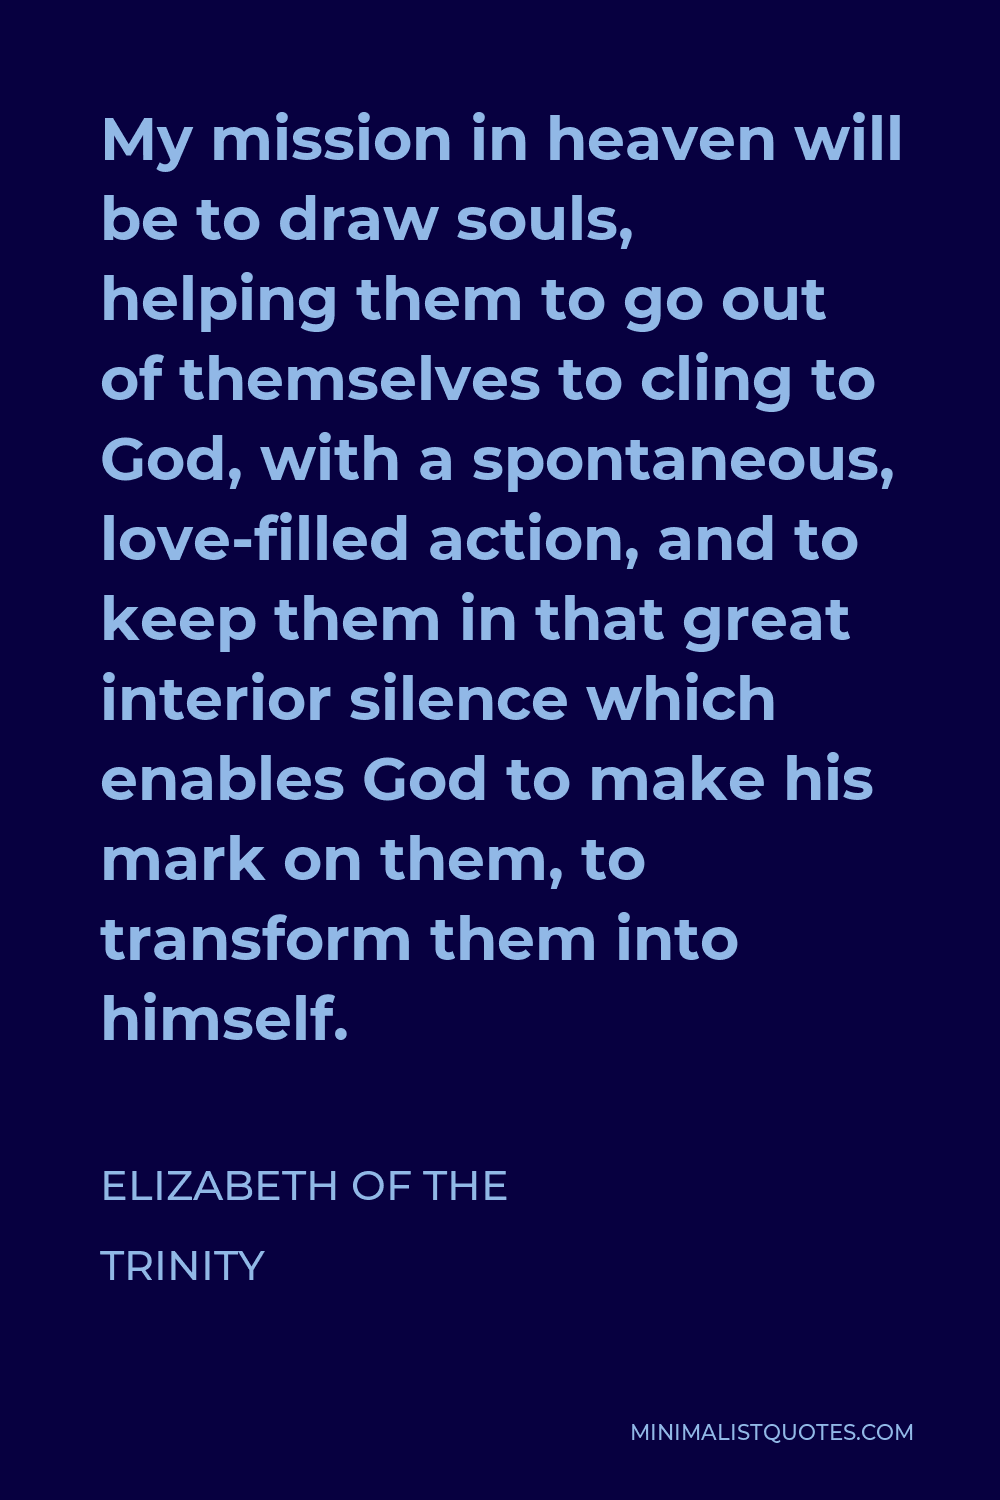 Elizabeth of the Trinity Quote - My mission in heaven will be to draw souls, helping them to go out of themselves to cling to God, with a spontaneous, love-filled action, and to keep them in that great interior silence which enables God to make his mark on them, to transform them into himself.